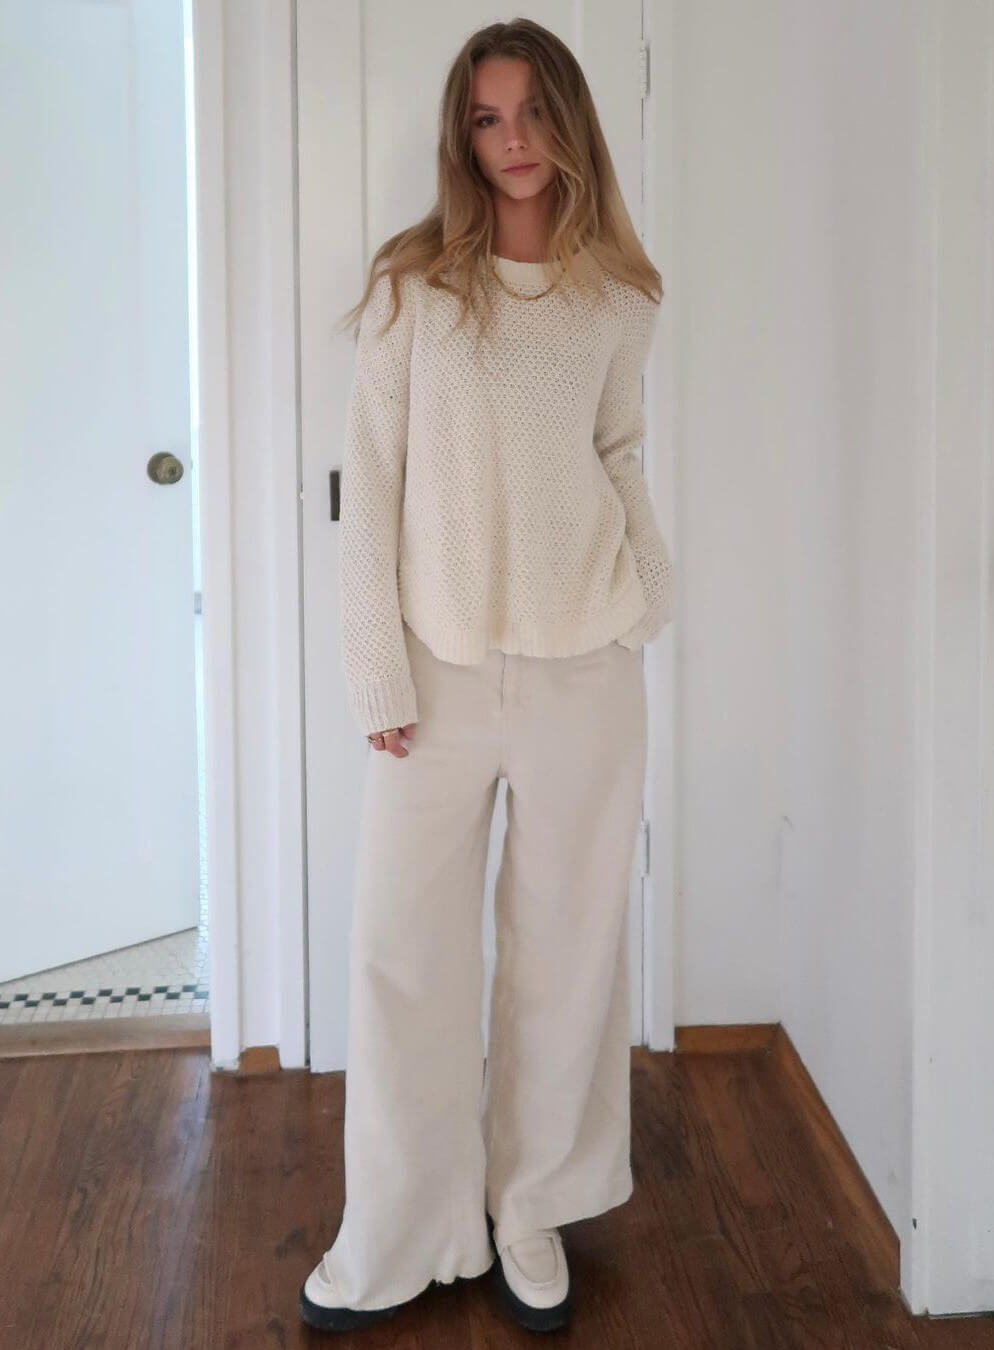 Anna Shumate In White Woolen Sweater With Pants